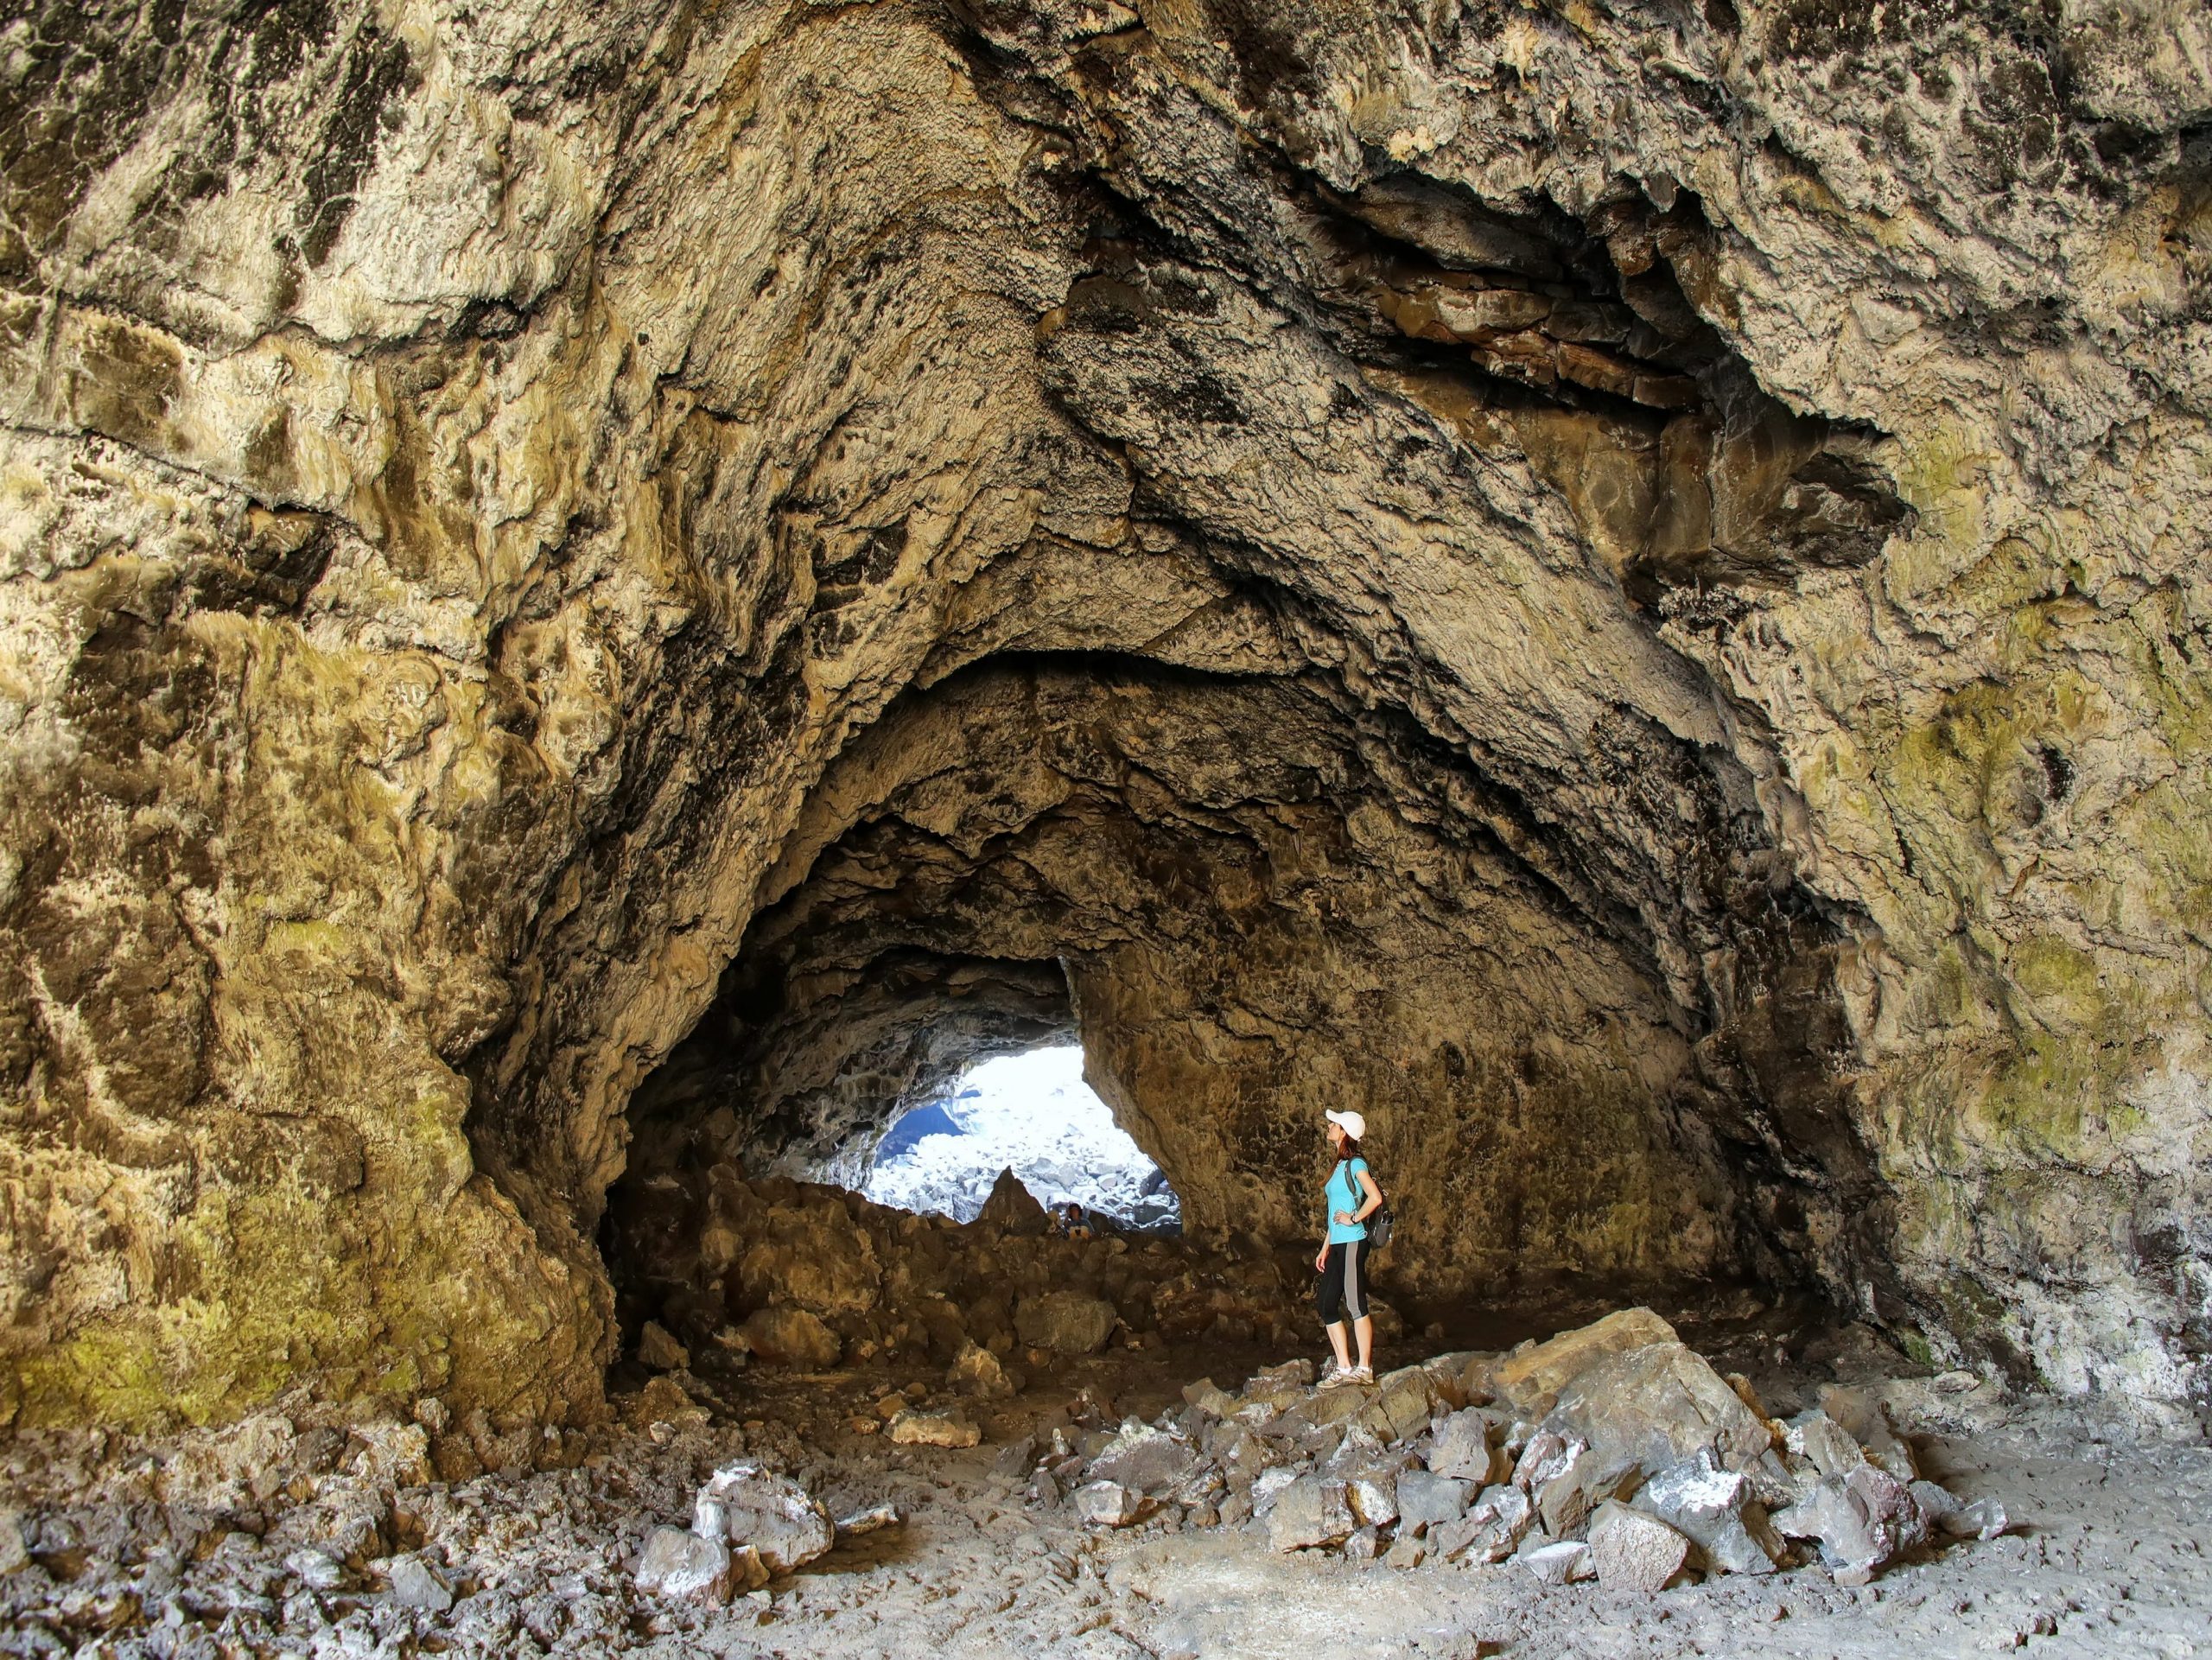 A woman stands in a scene of a vast lava tunnel with light peering through from the other side.